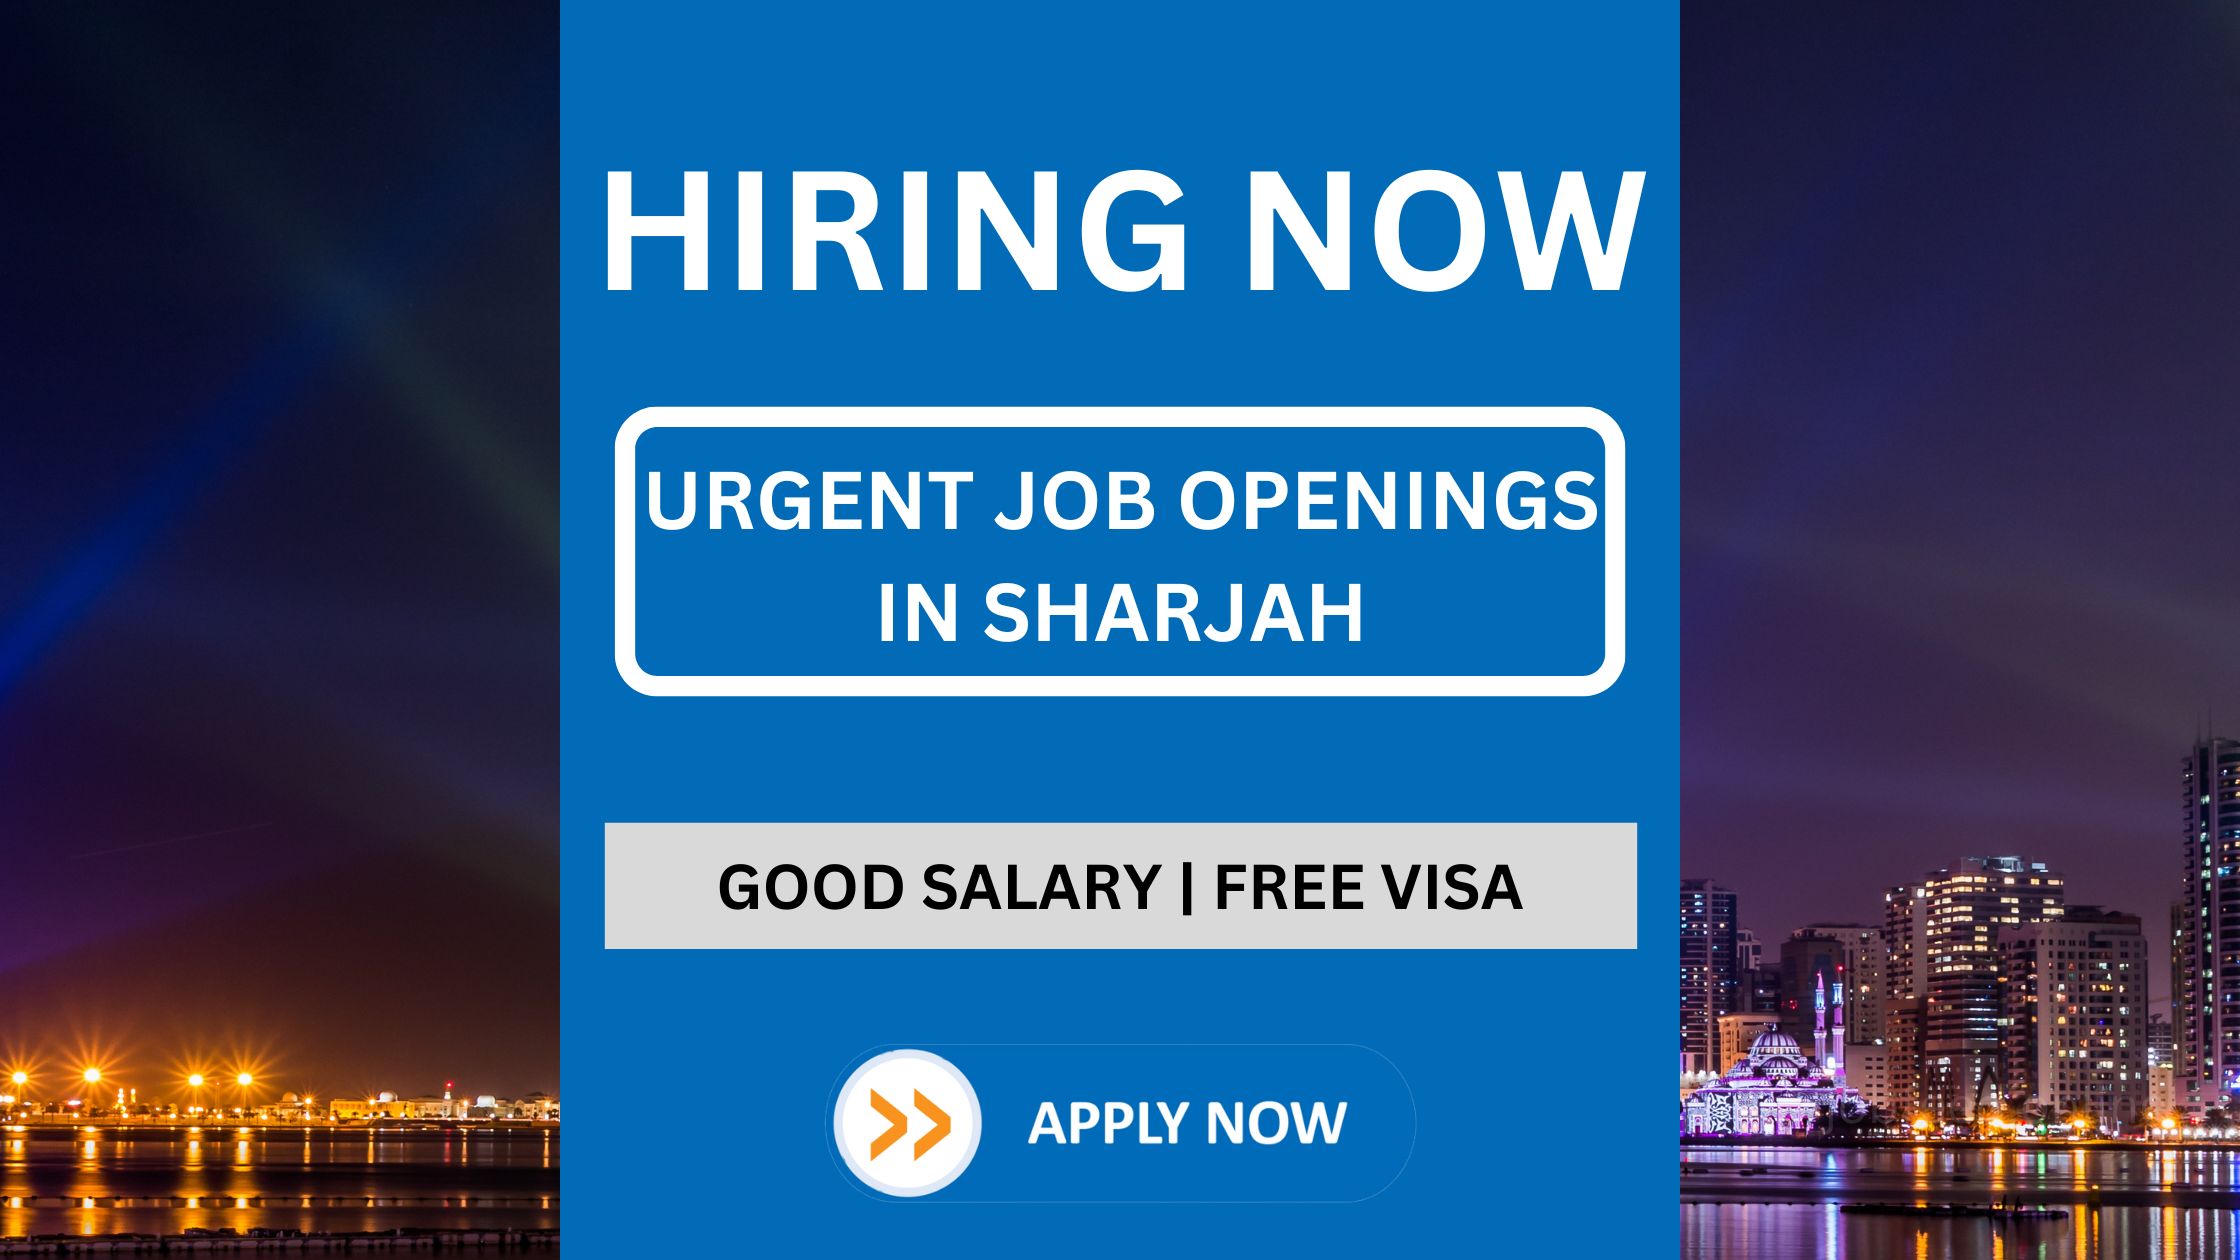 Urgent Job Openings in Sharjah for Aluminum & Glass and M.S. Steel Works